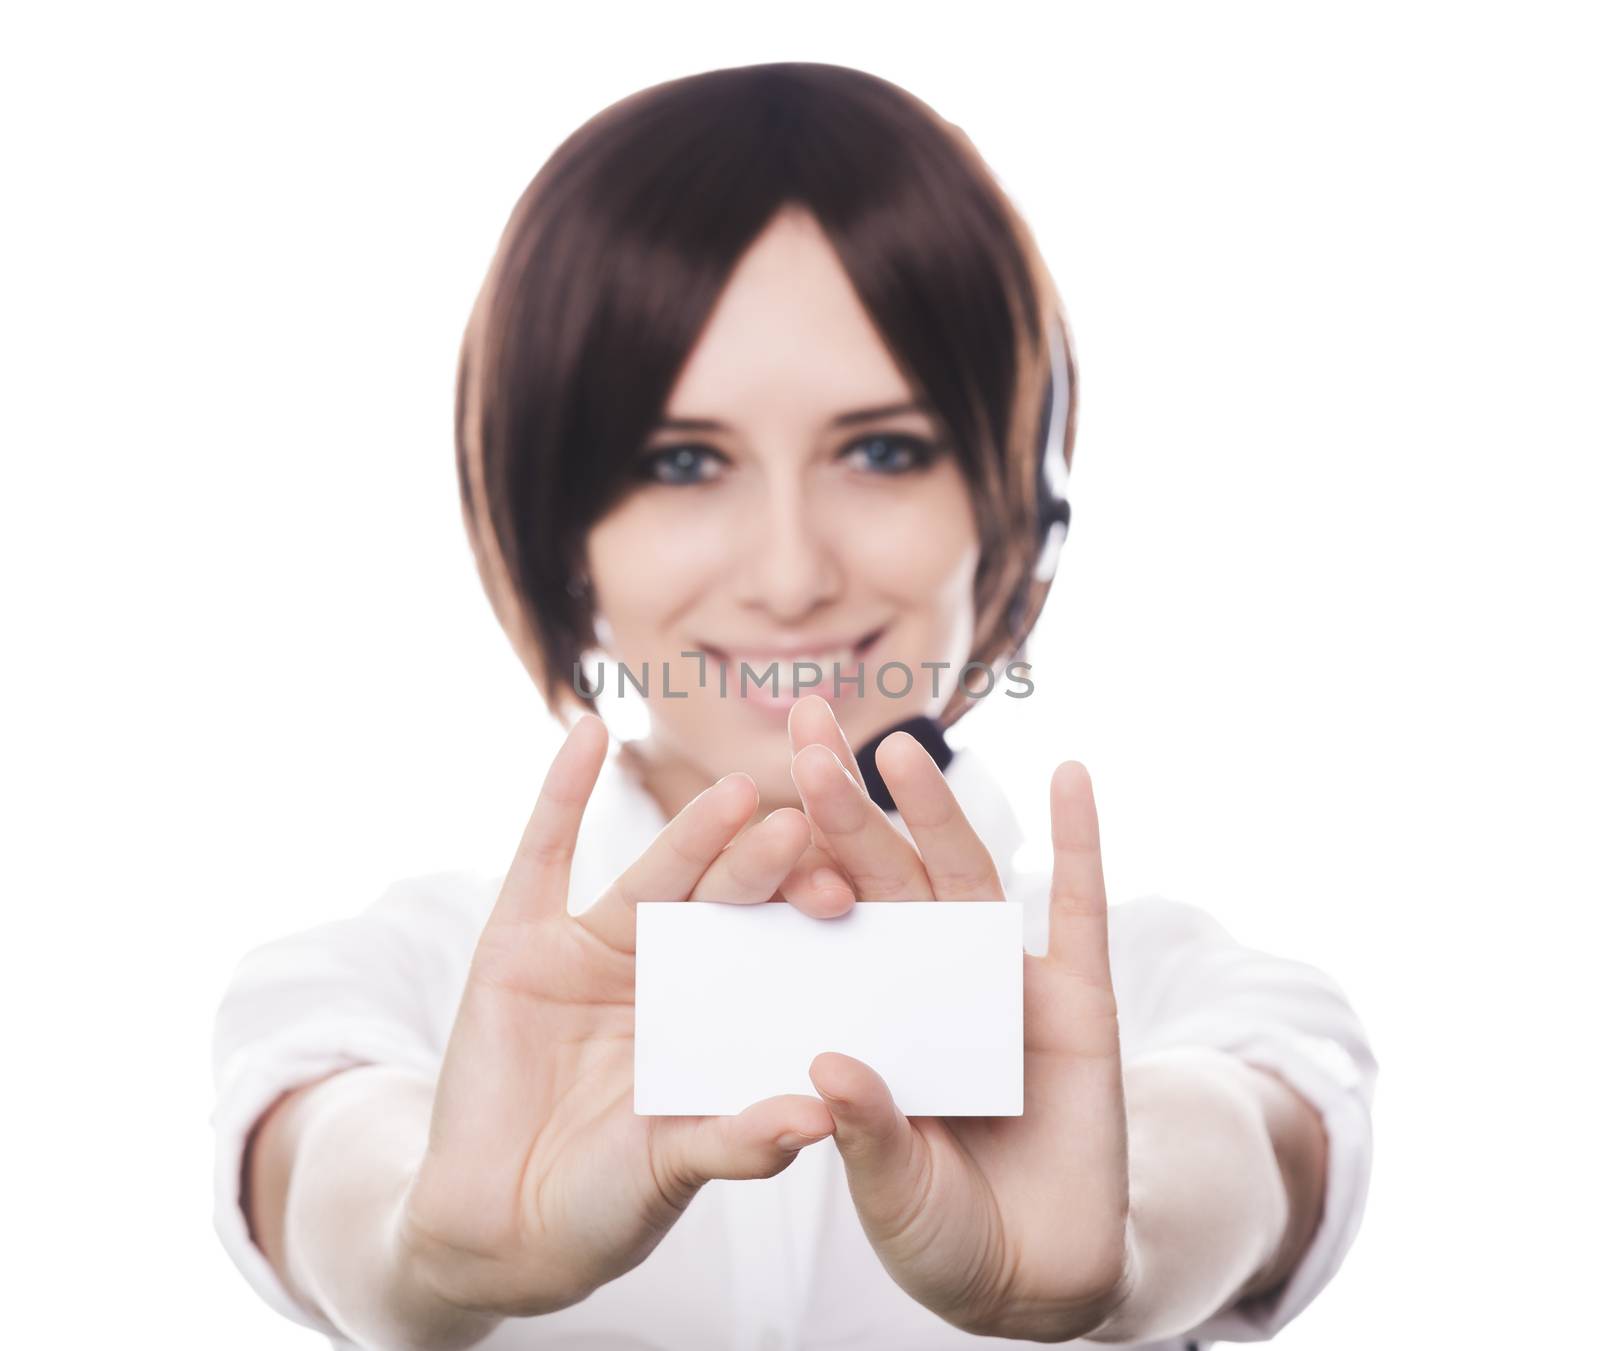 Call Center Girl Holding Card by NicoletaIonescu